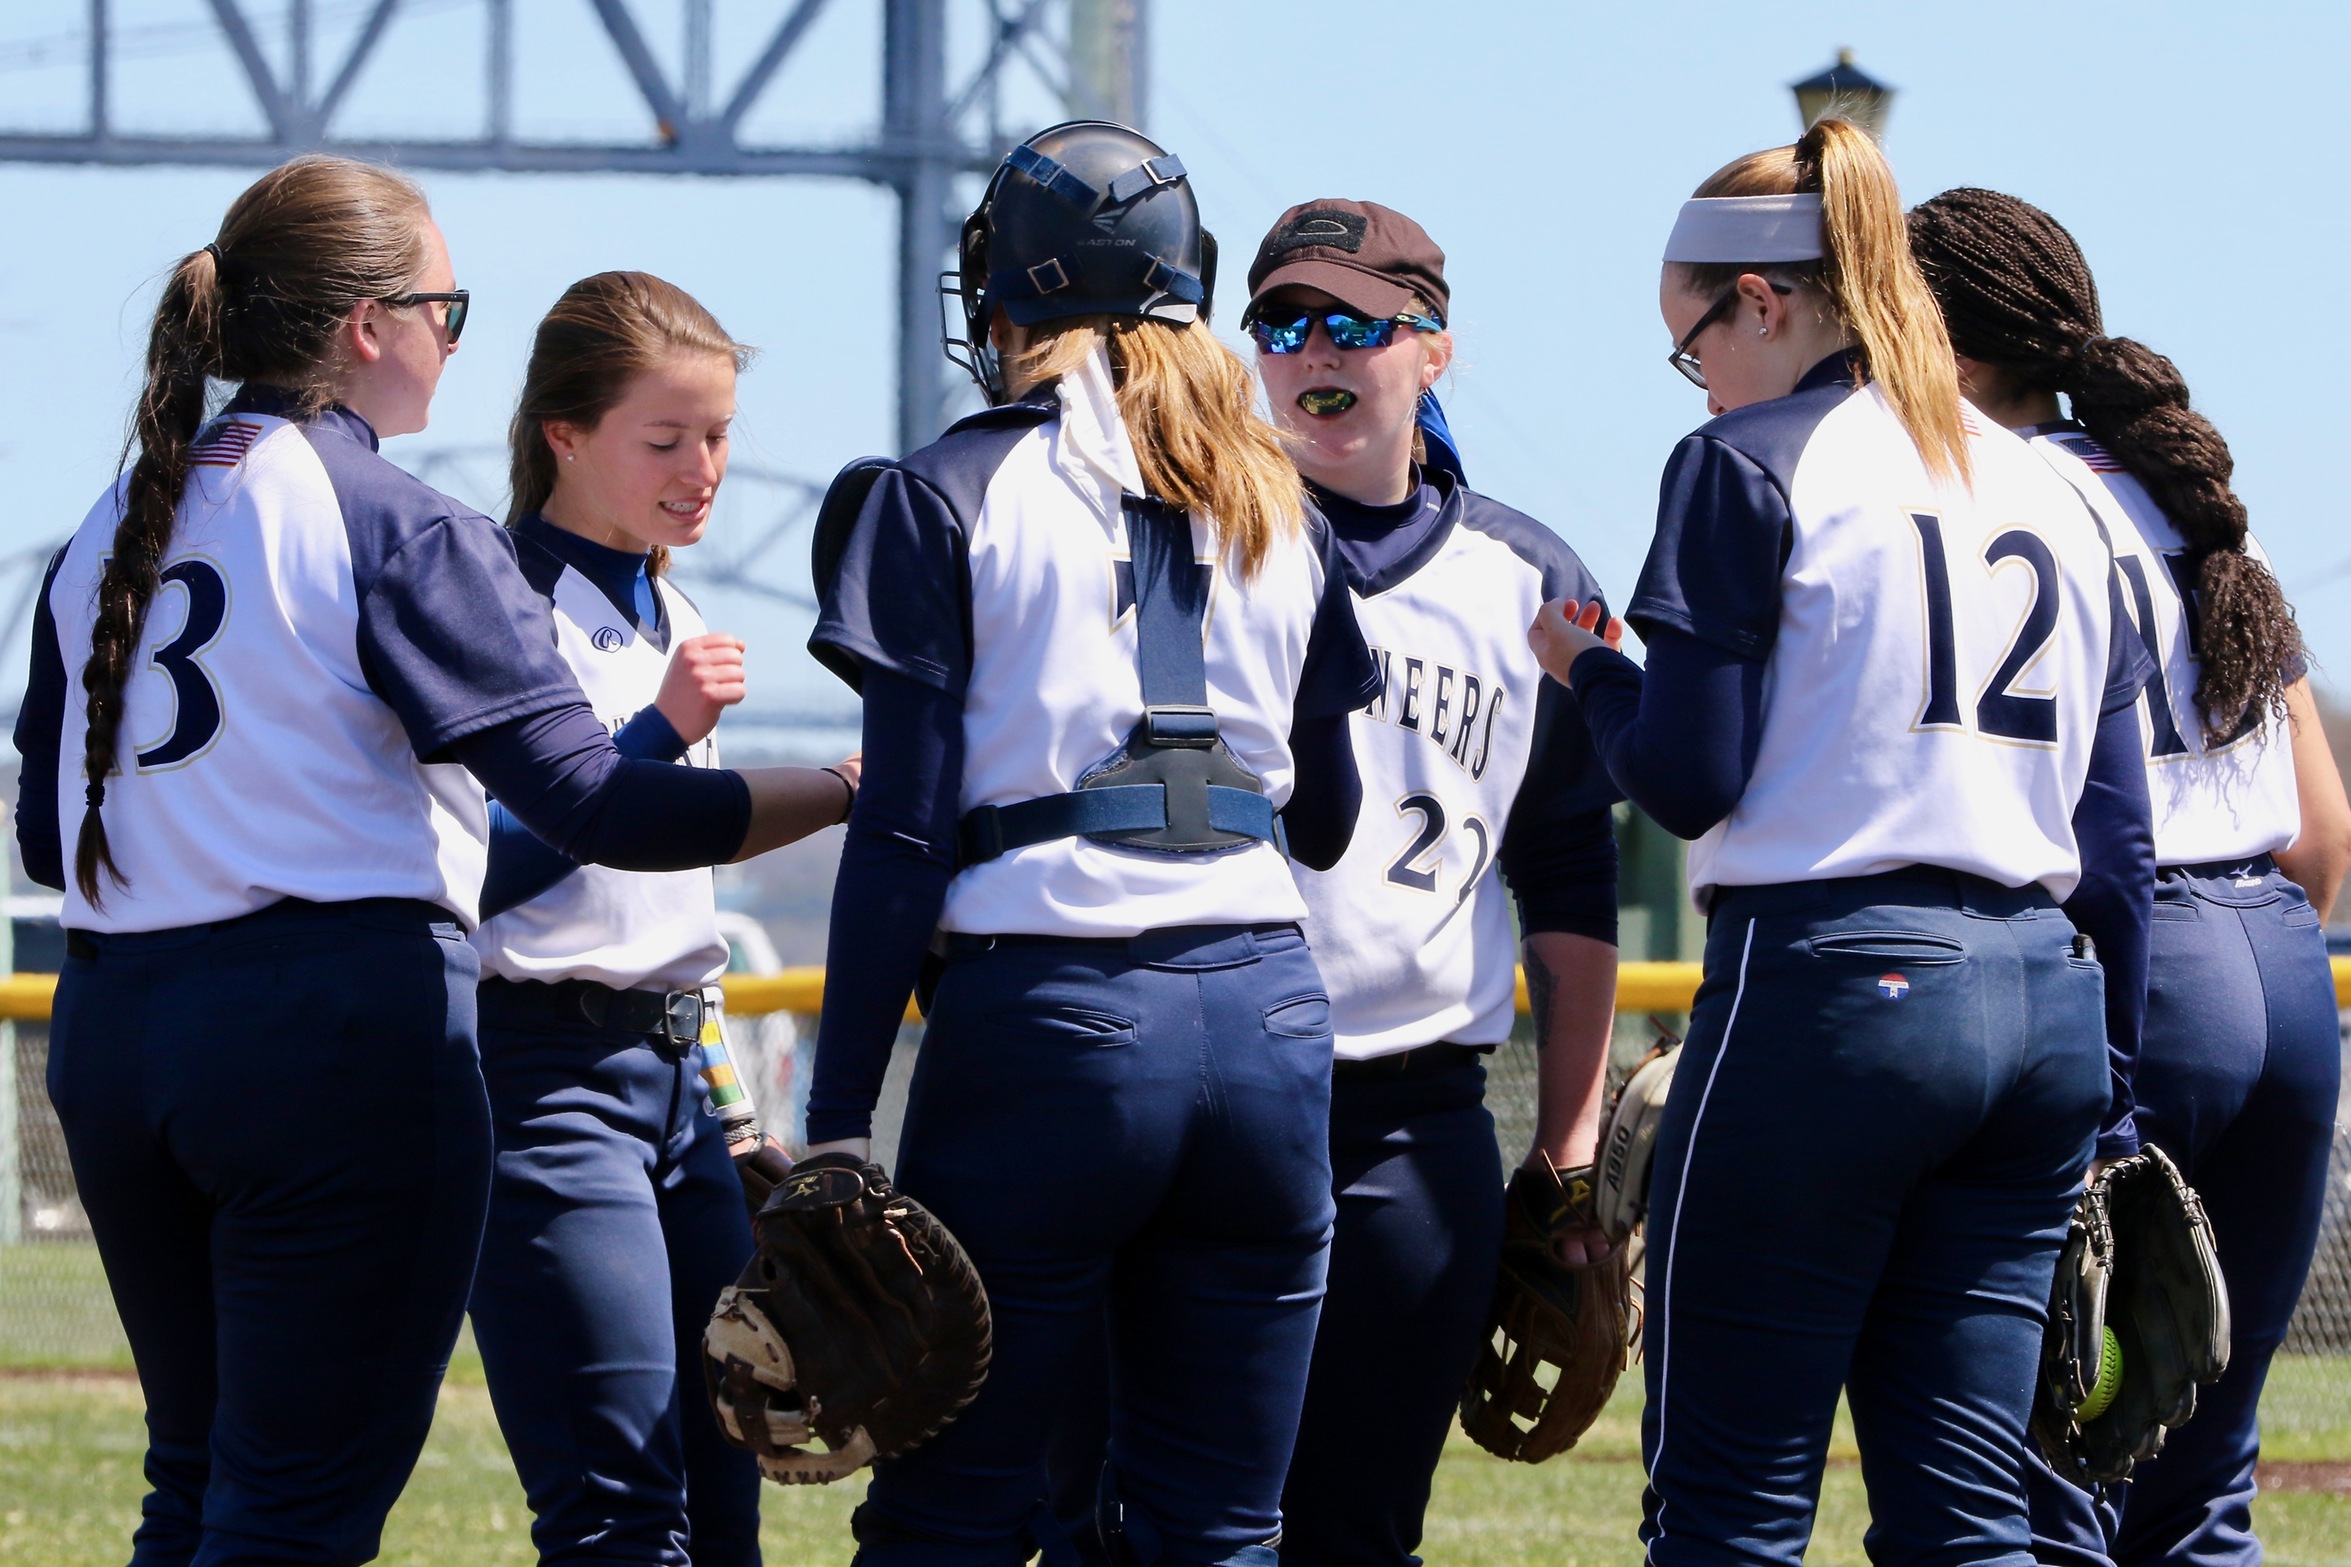 Softball: Maritime Unable to Hold off Trailblazers in Conference Twinbill